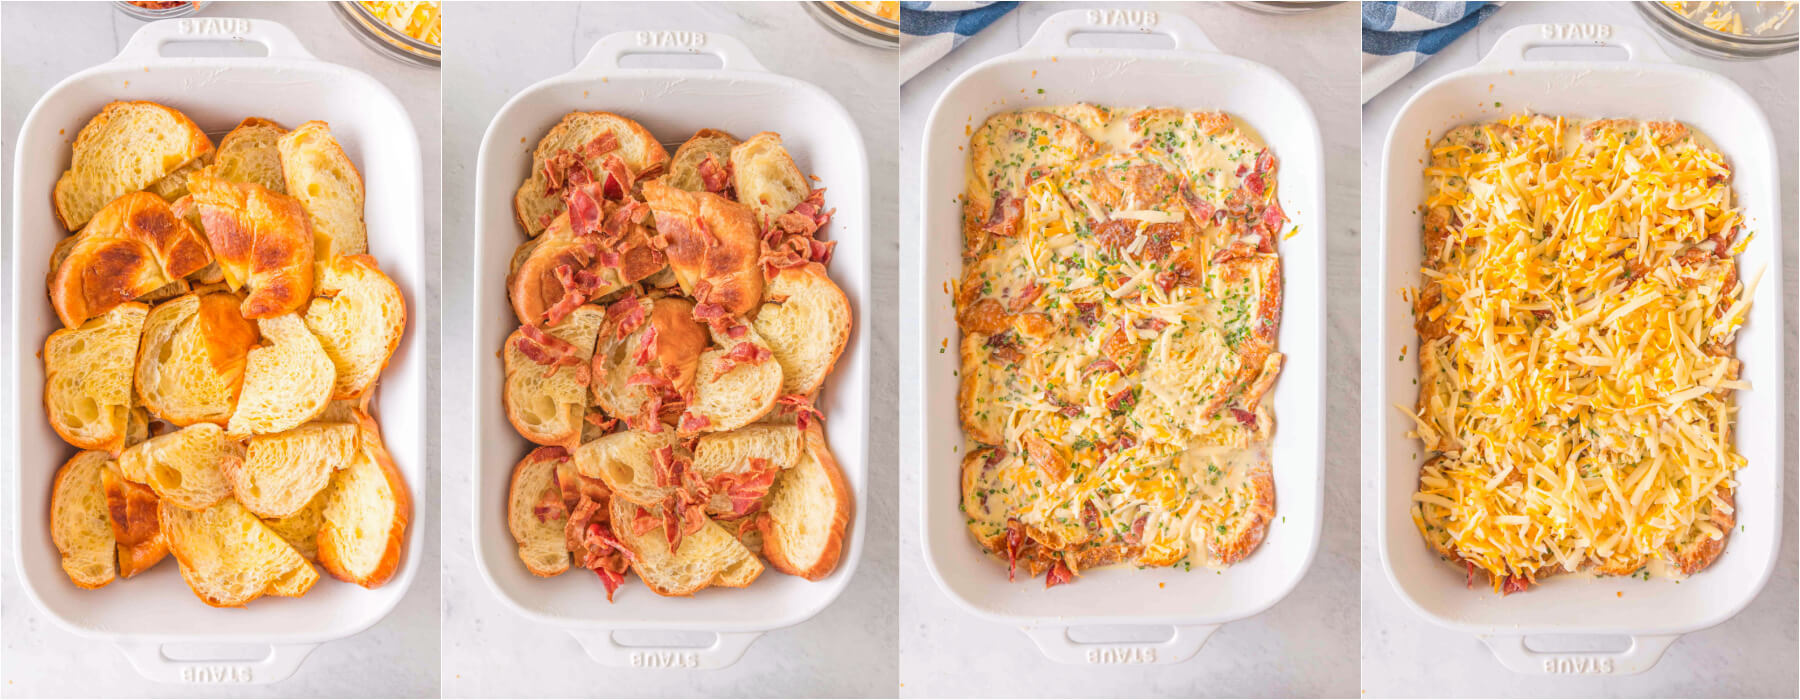 A series of process photos showing how to layer breakfast casserole ingredients in a white baking dish.